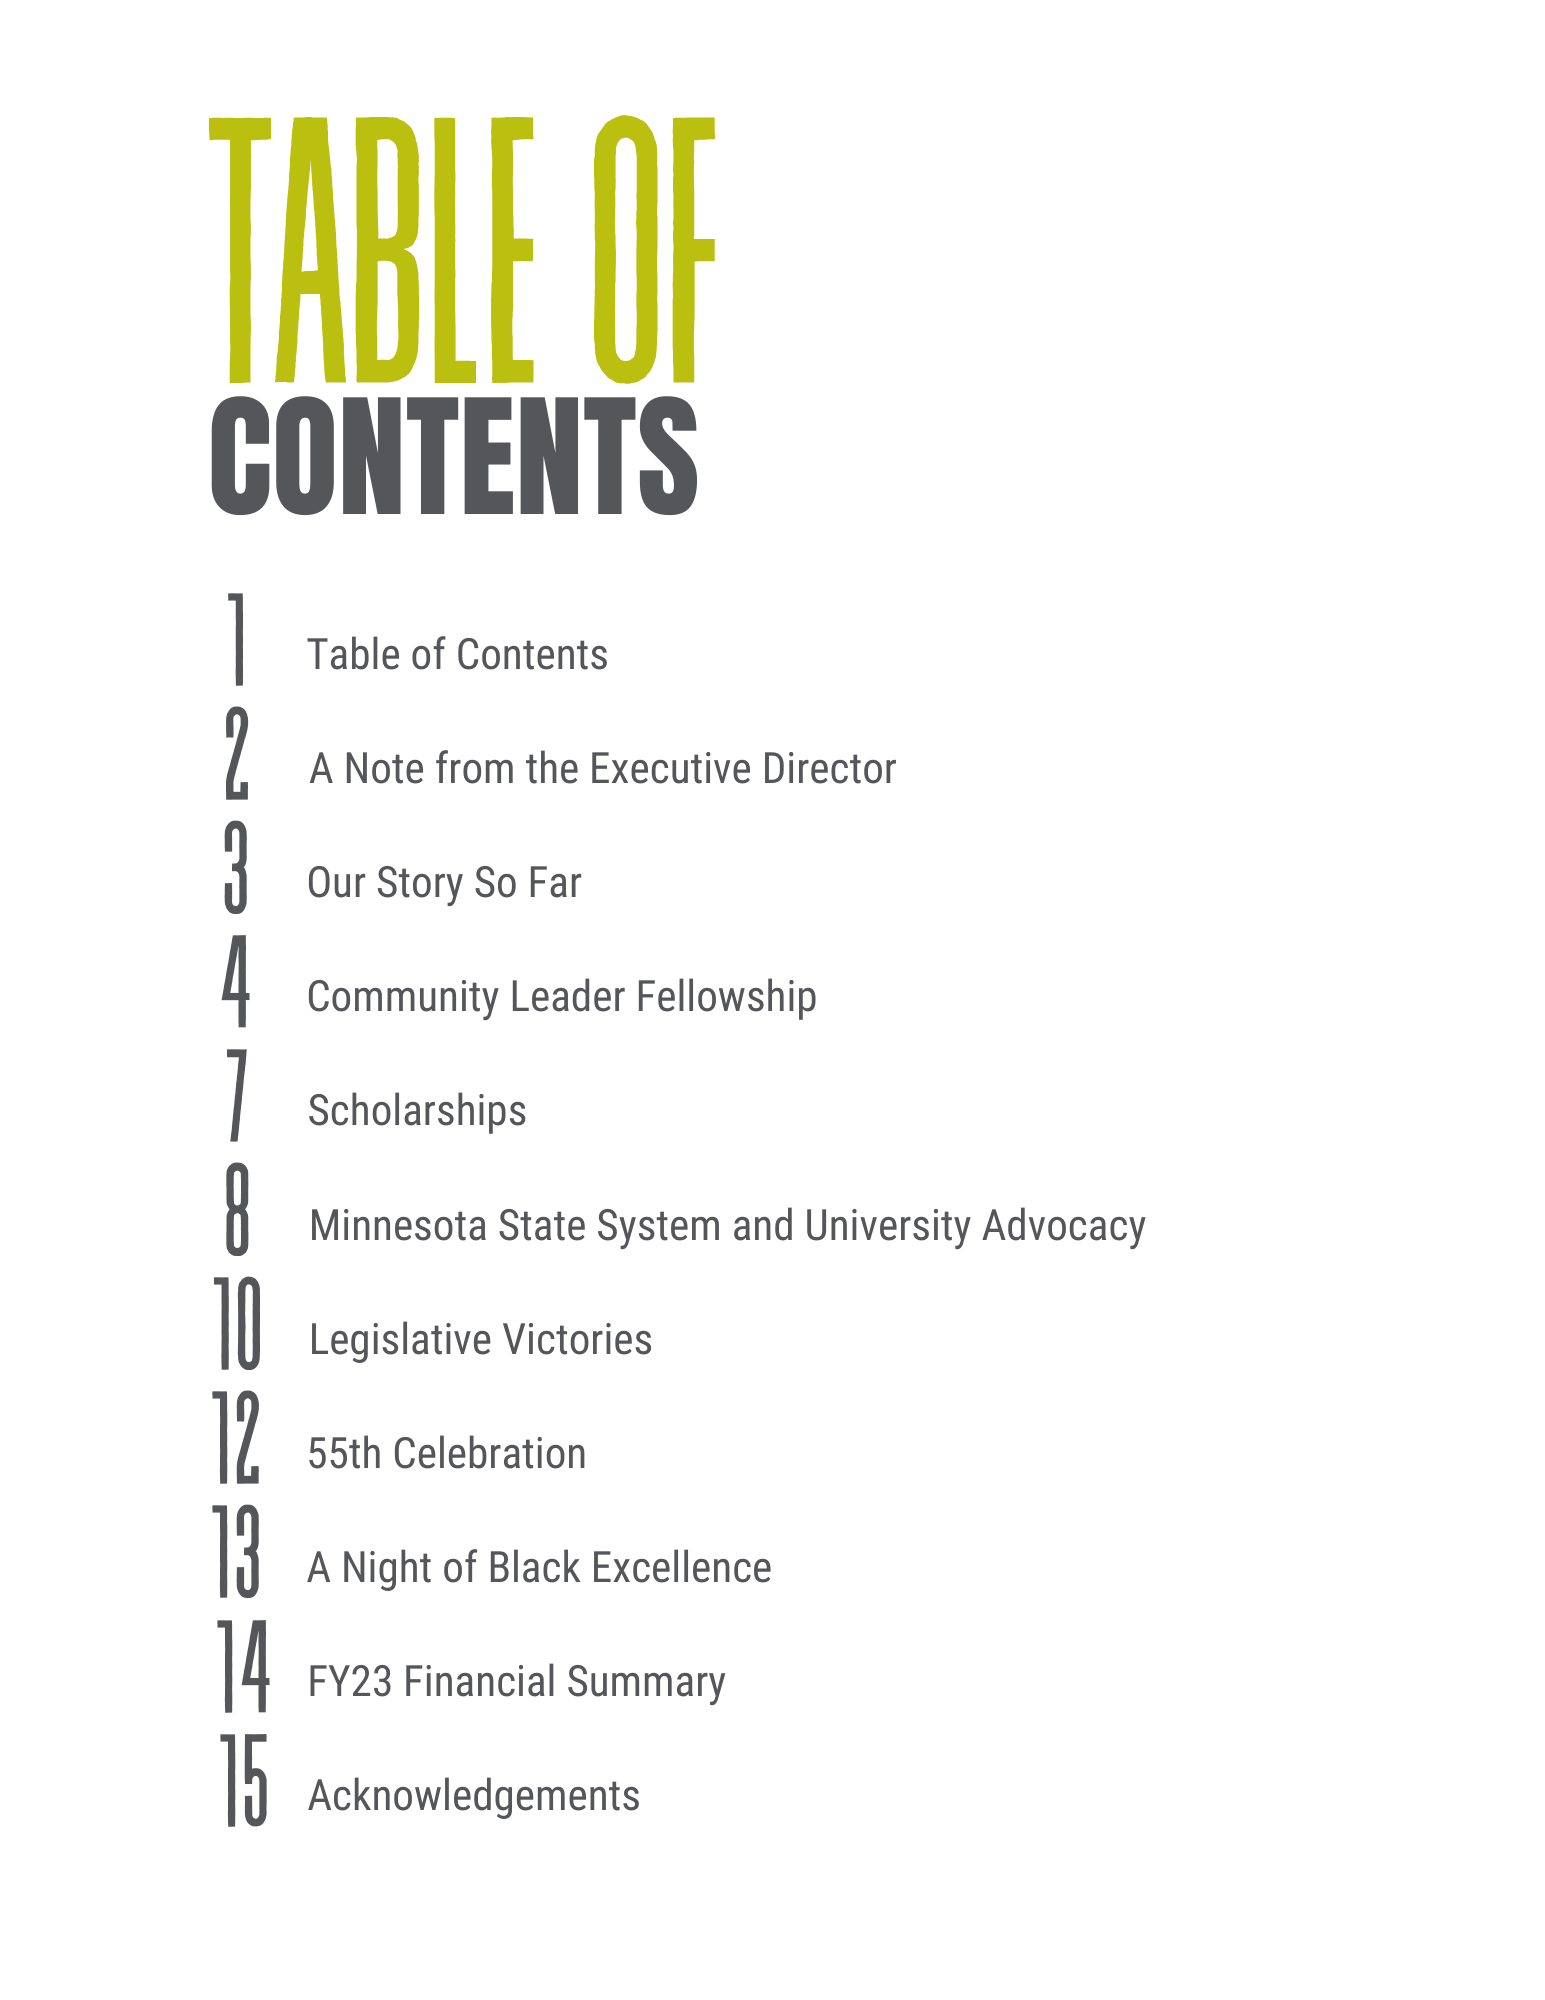 Table of Contents.png